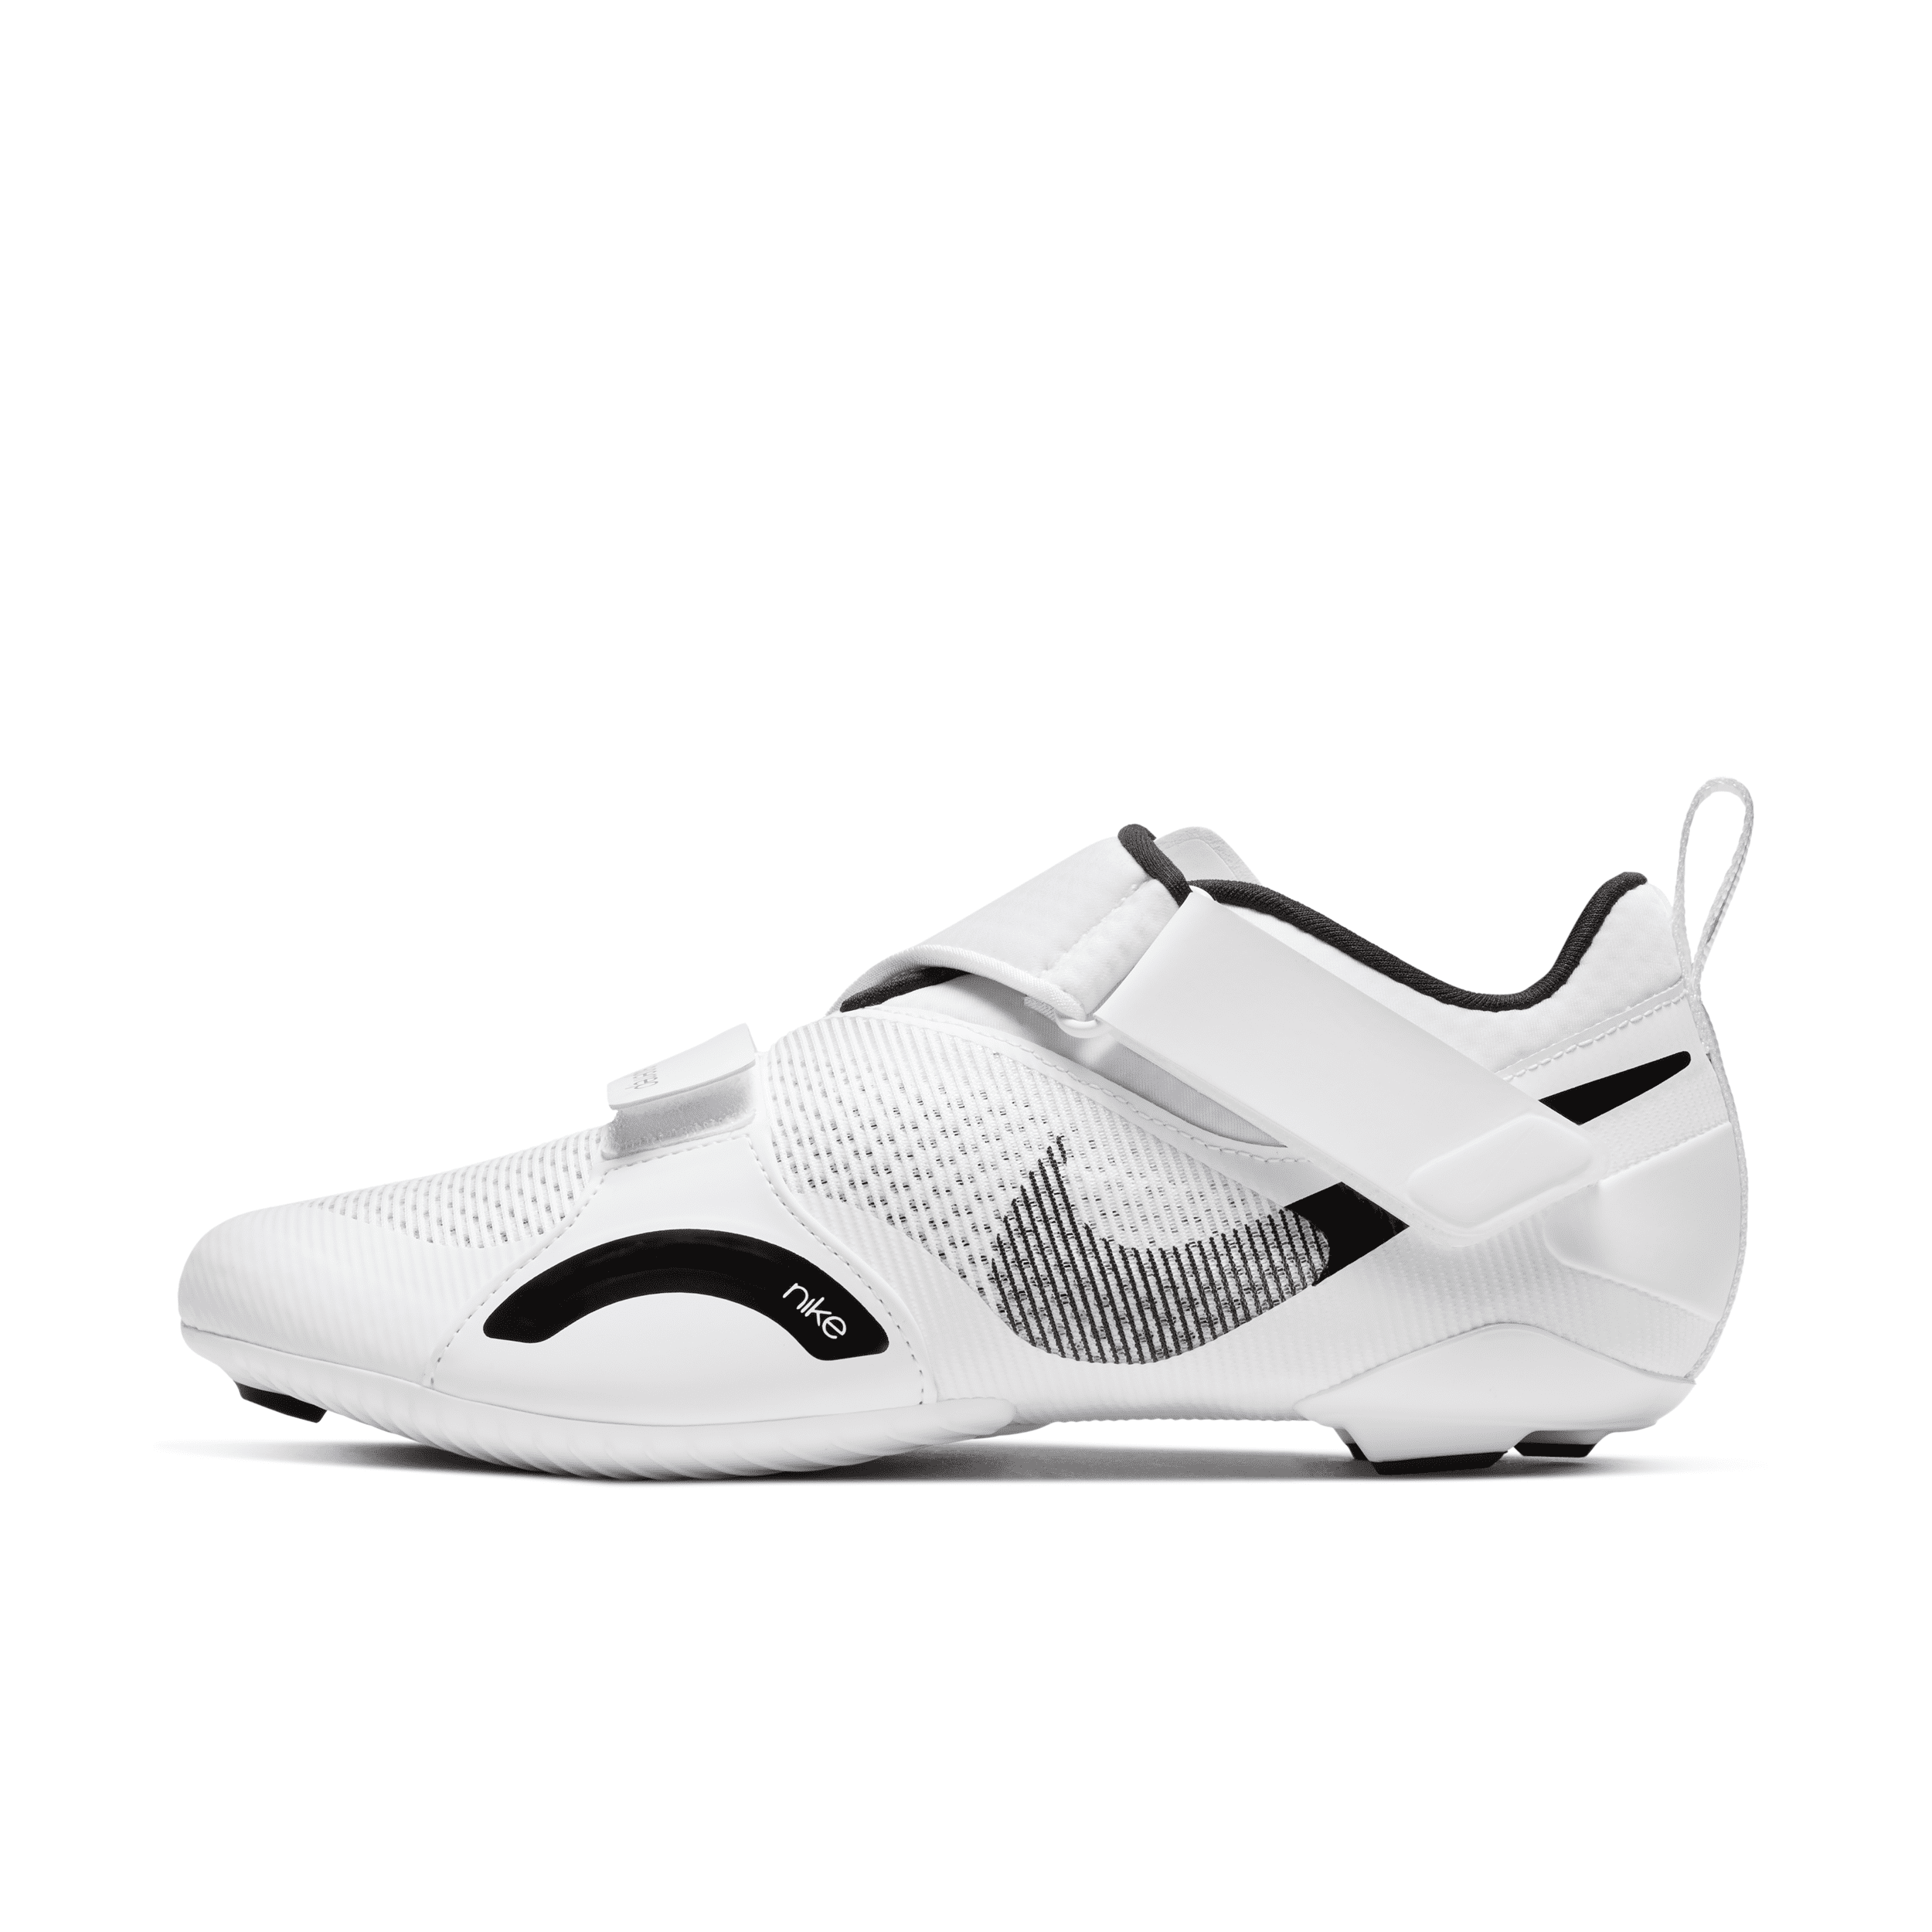 Nike Men's SuperRep Cycle Indoor Cycling Shoes in White, Size: 6.5 | CW2191-100